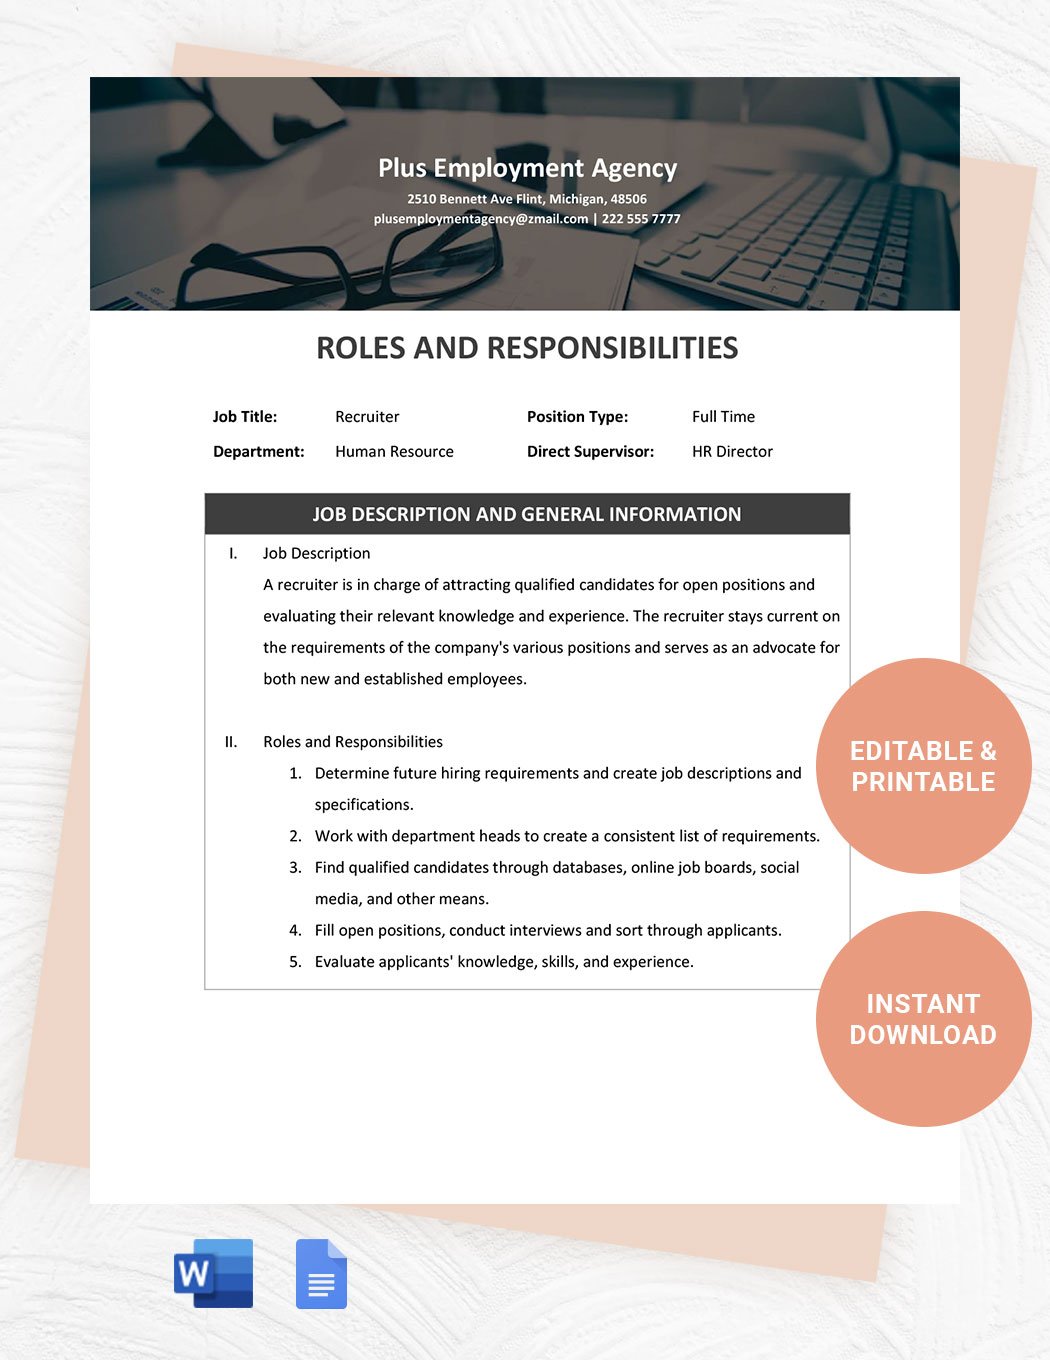 Recruiting Roles And Responsibilities Template in Word, Google Docs